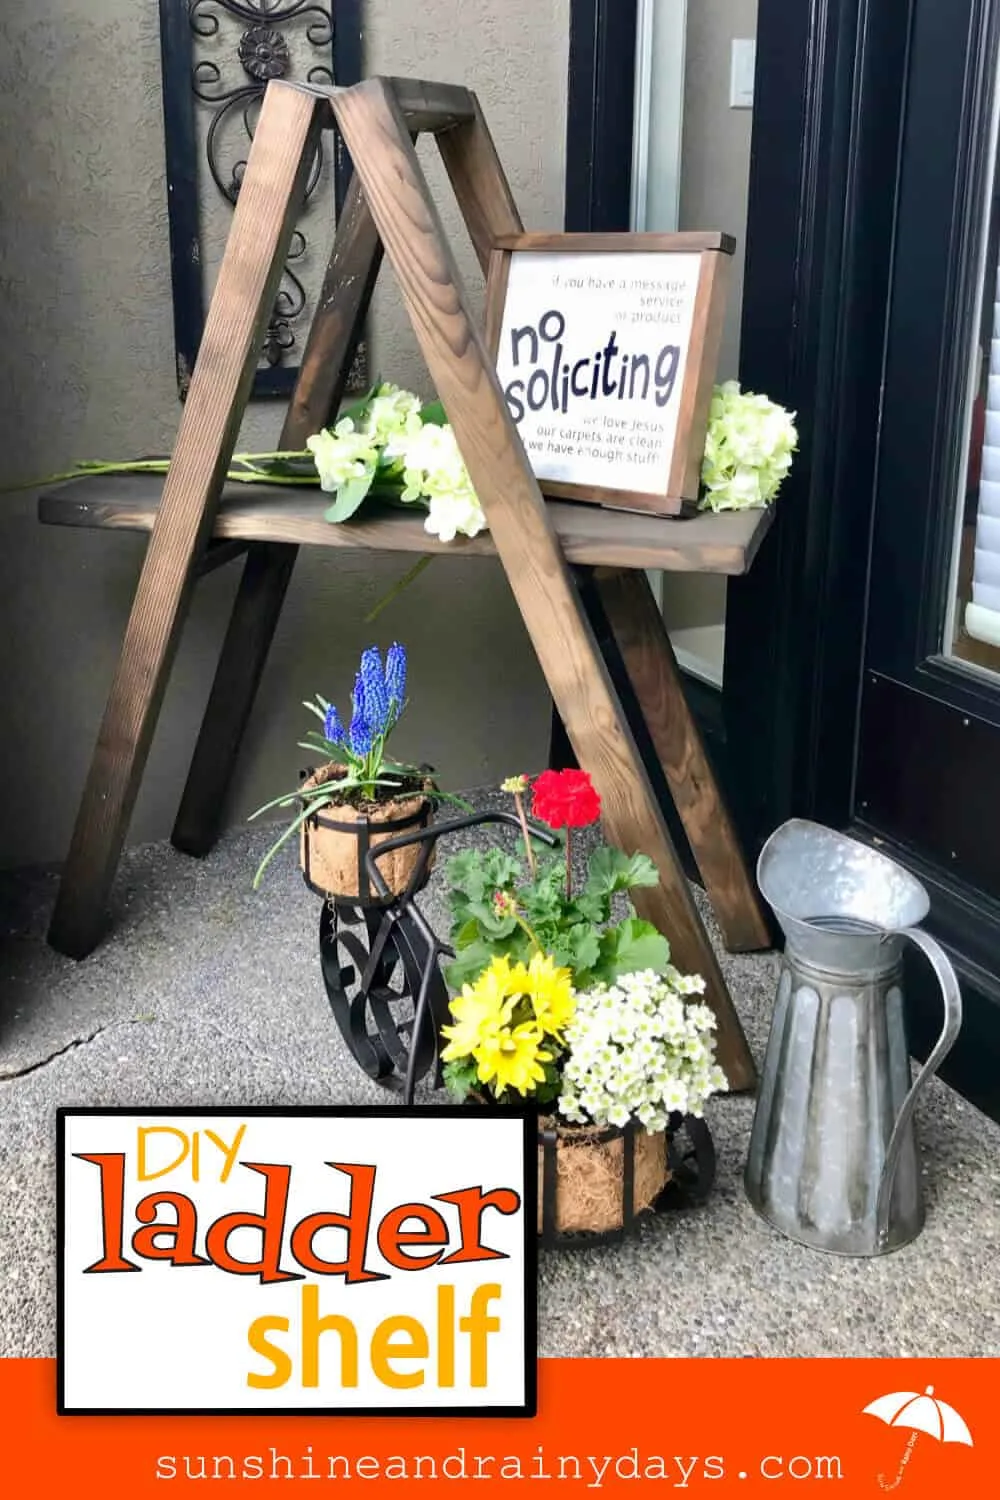 This DIY Ladder Shelf helps decorate the front porch!